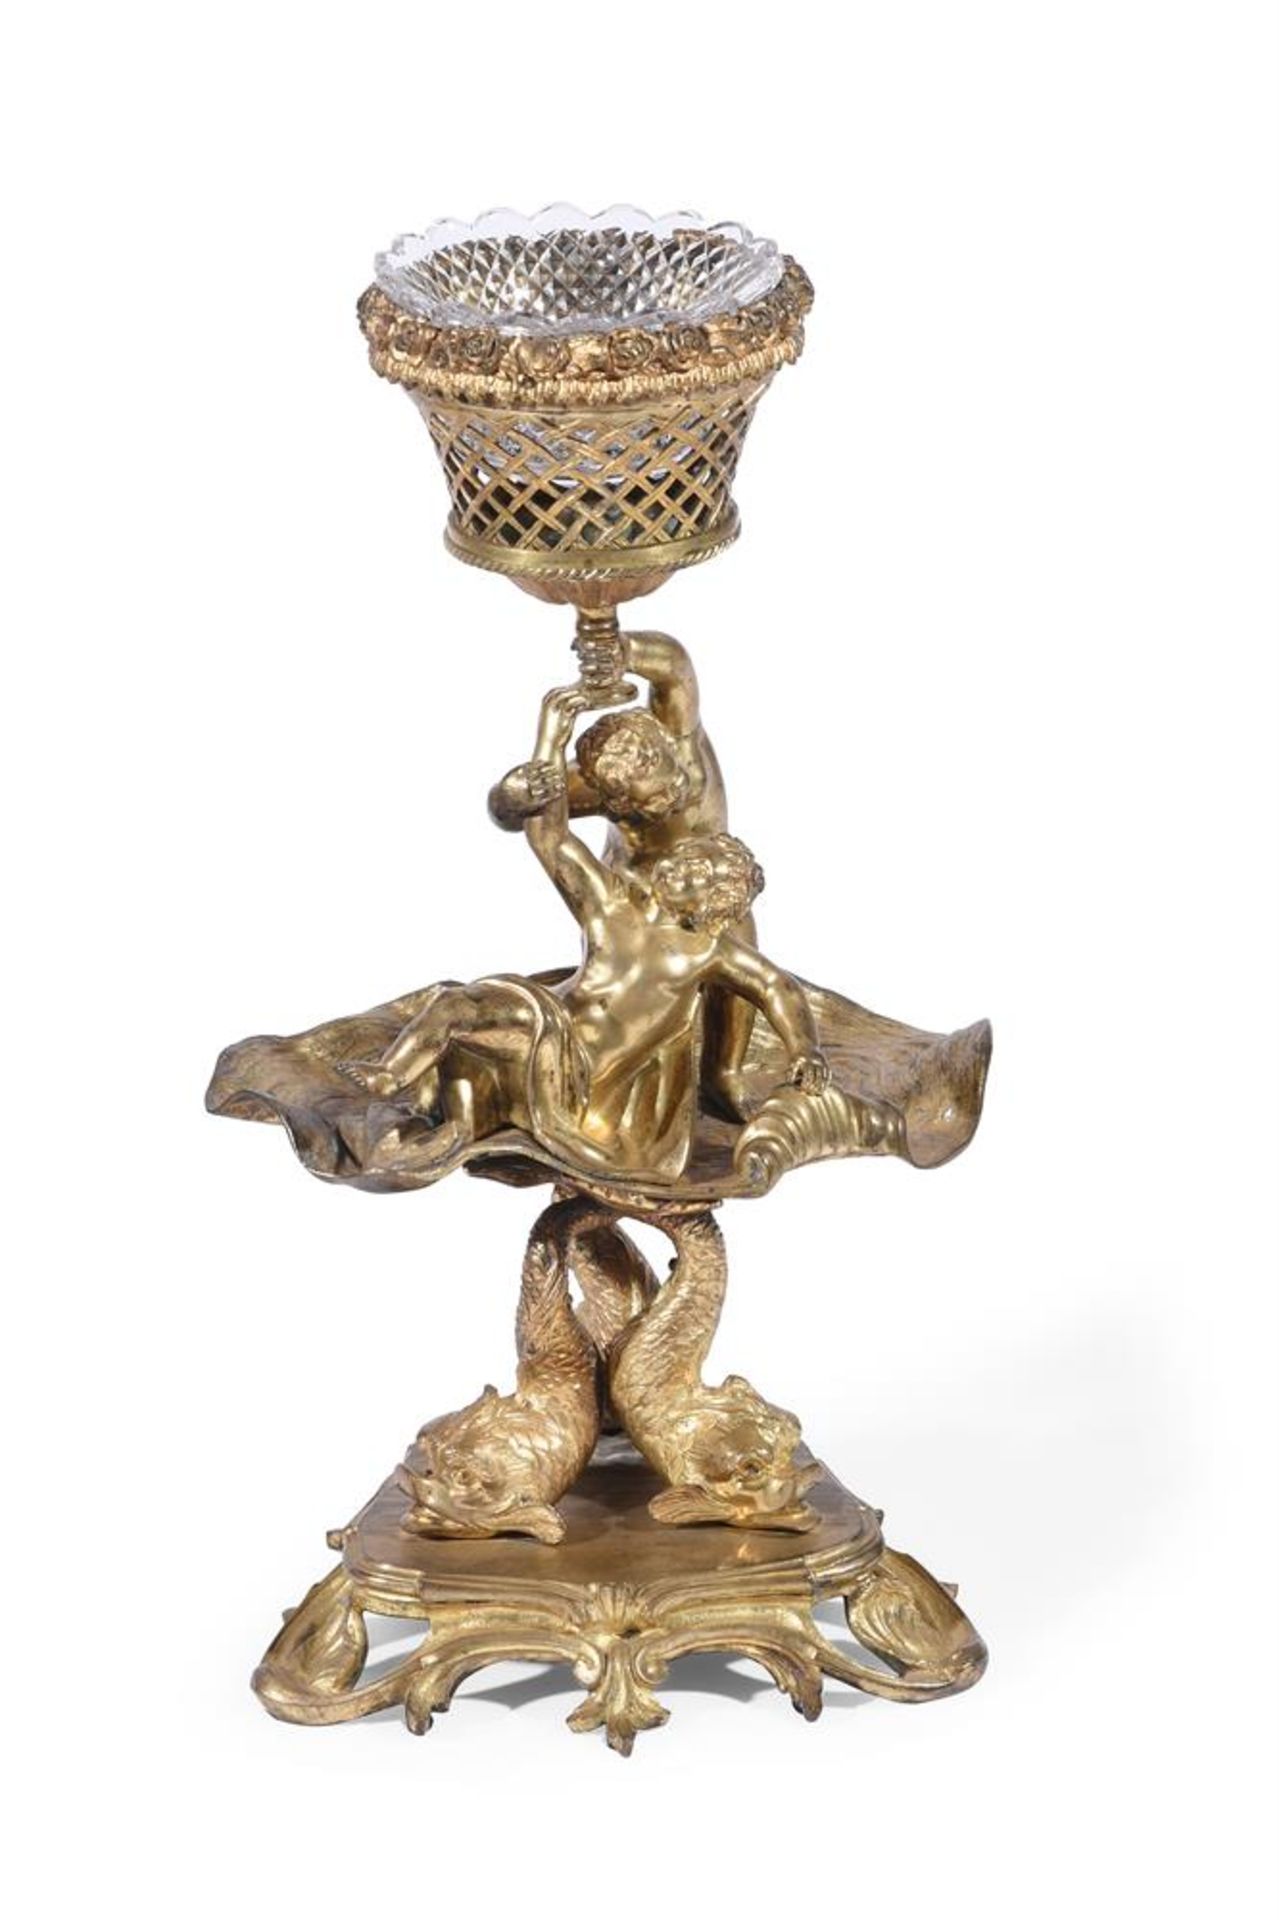 A LARGE ORNATE GILT METAL TABLE CENTREPIECE, LATE 18TH CENTURY AND LATER